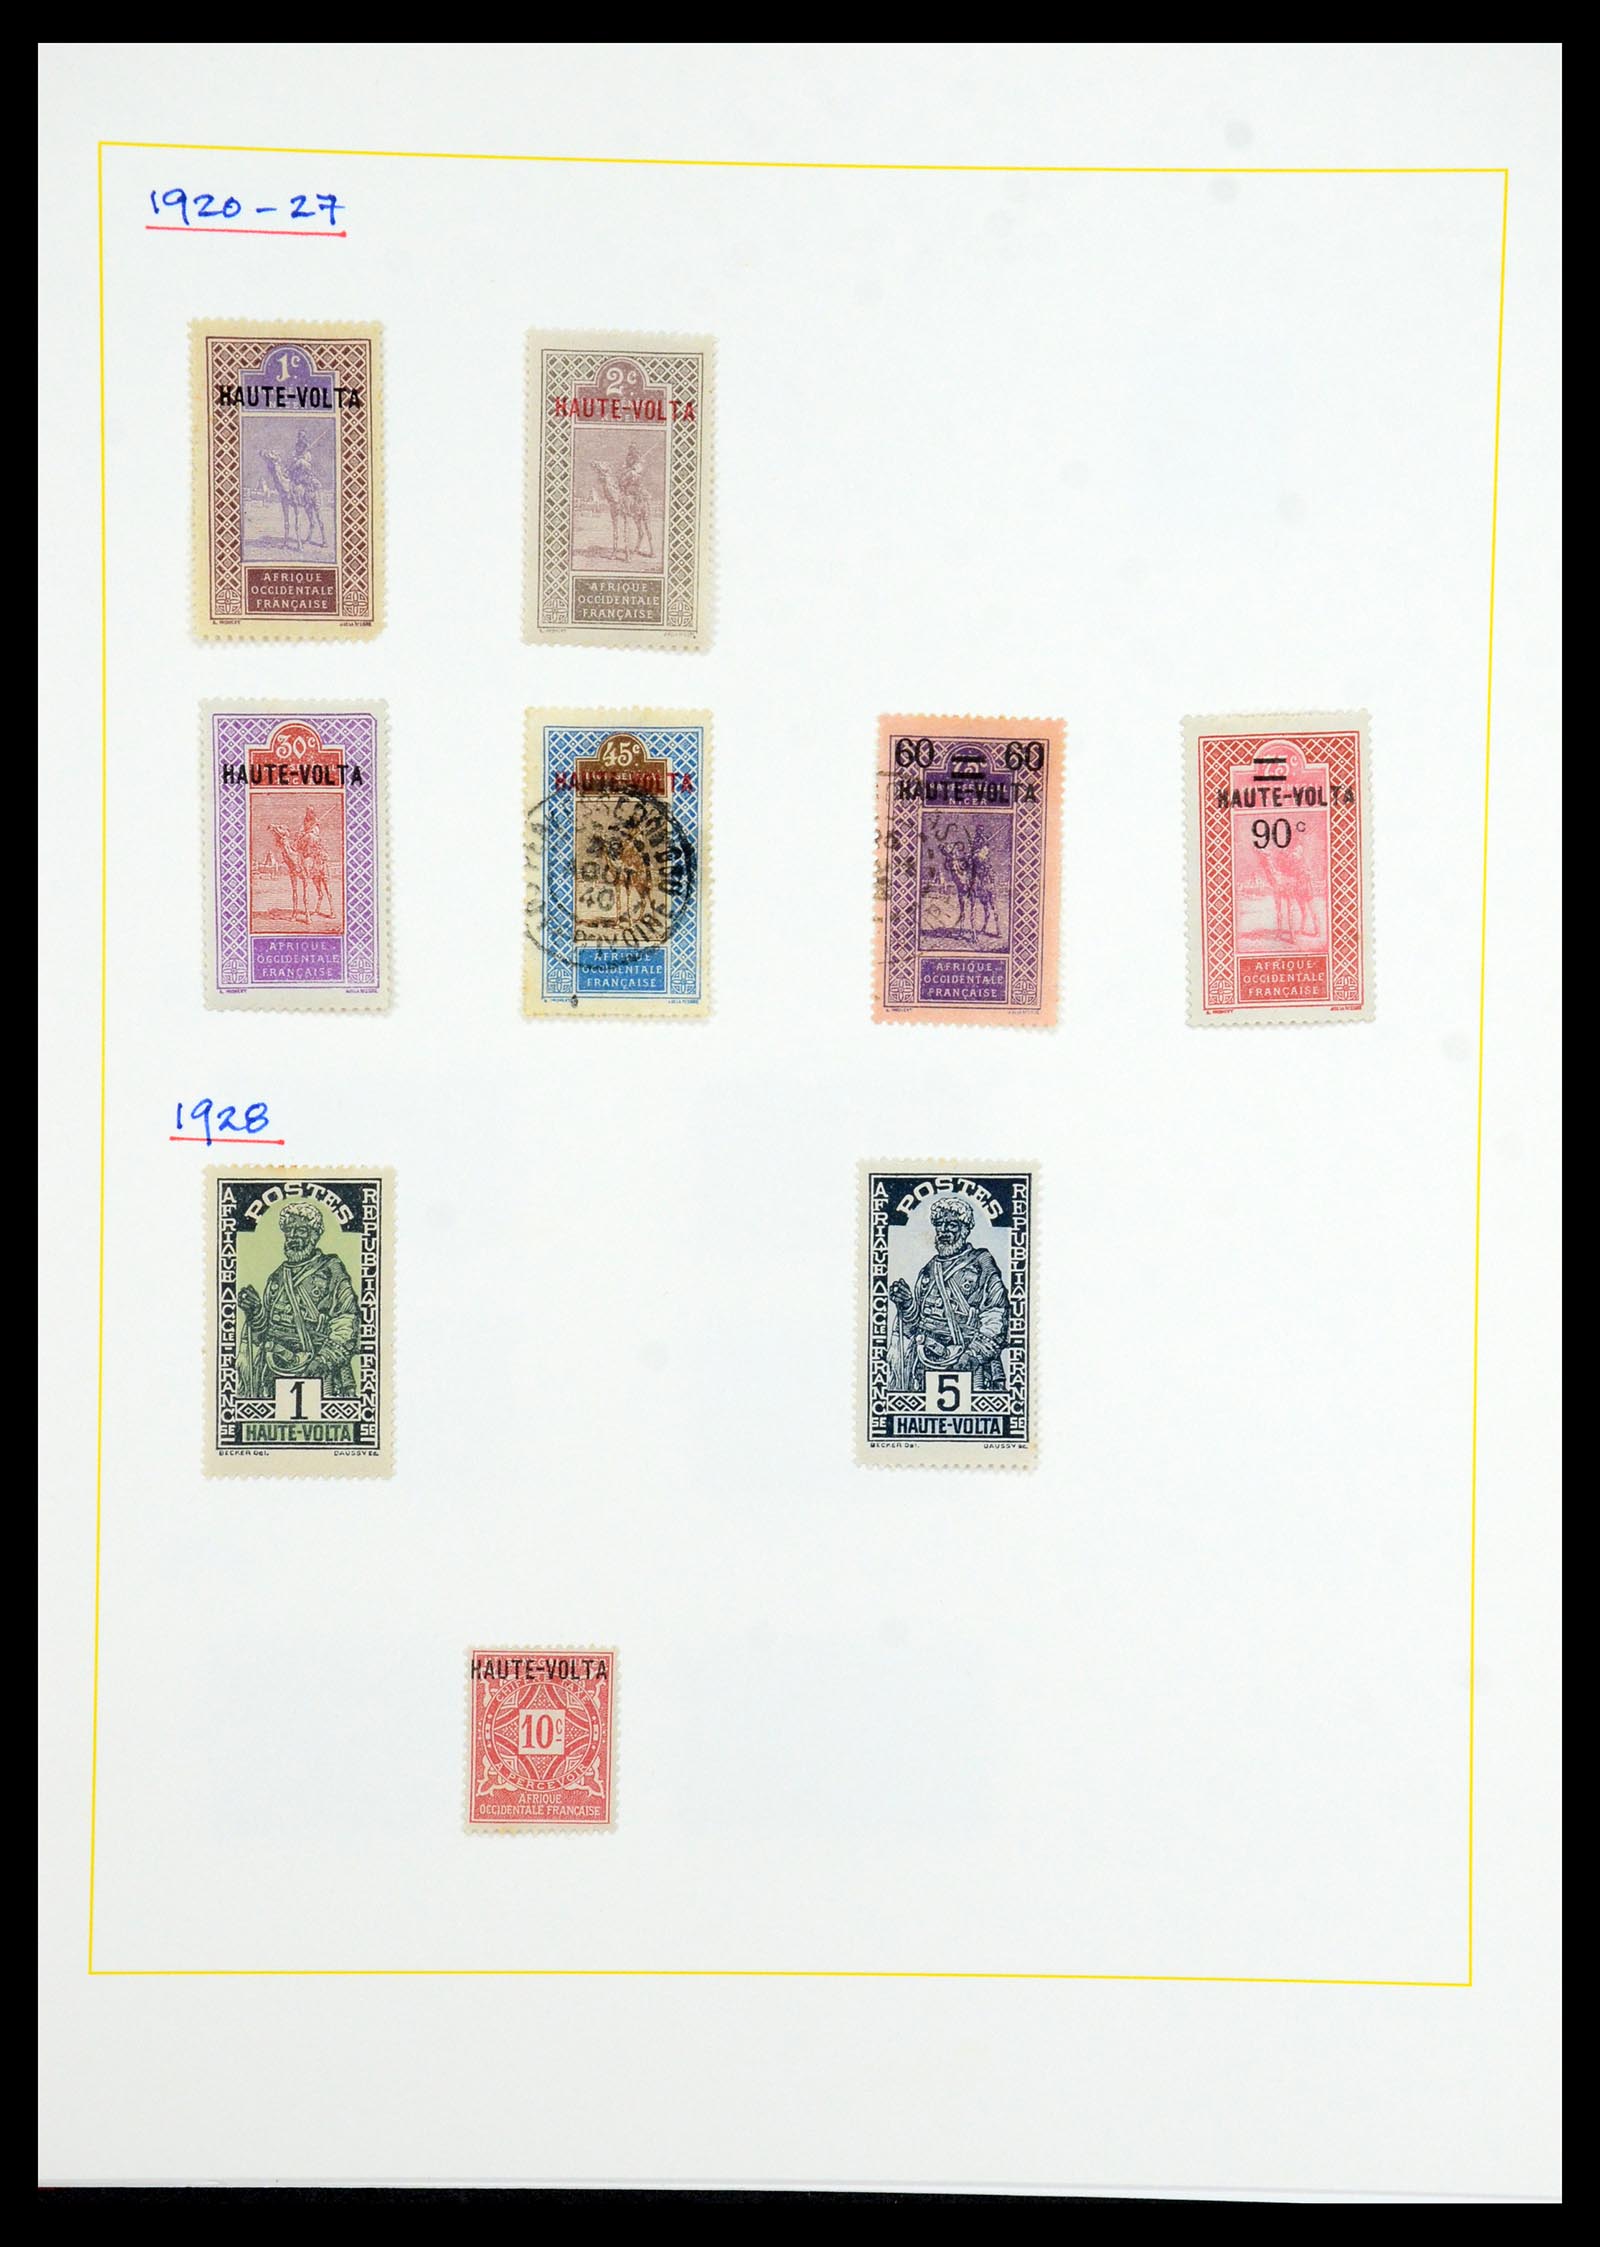 36099 286 - Stamp collection 36099 French coonies 1885-1950.